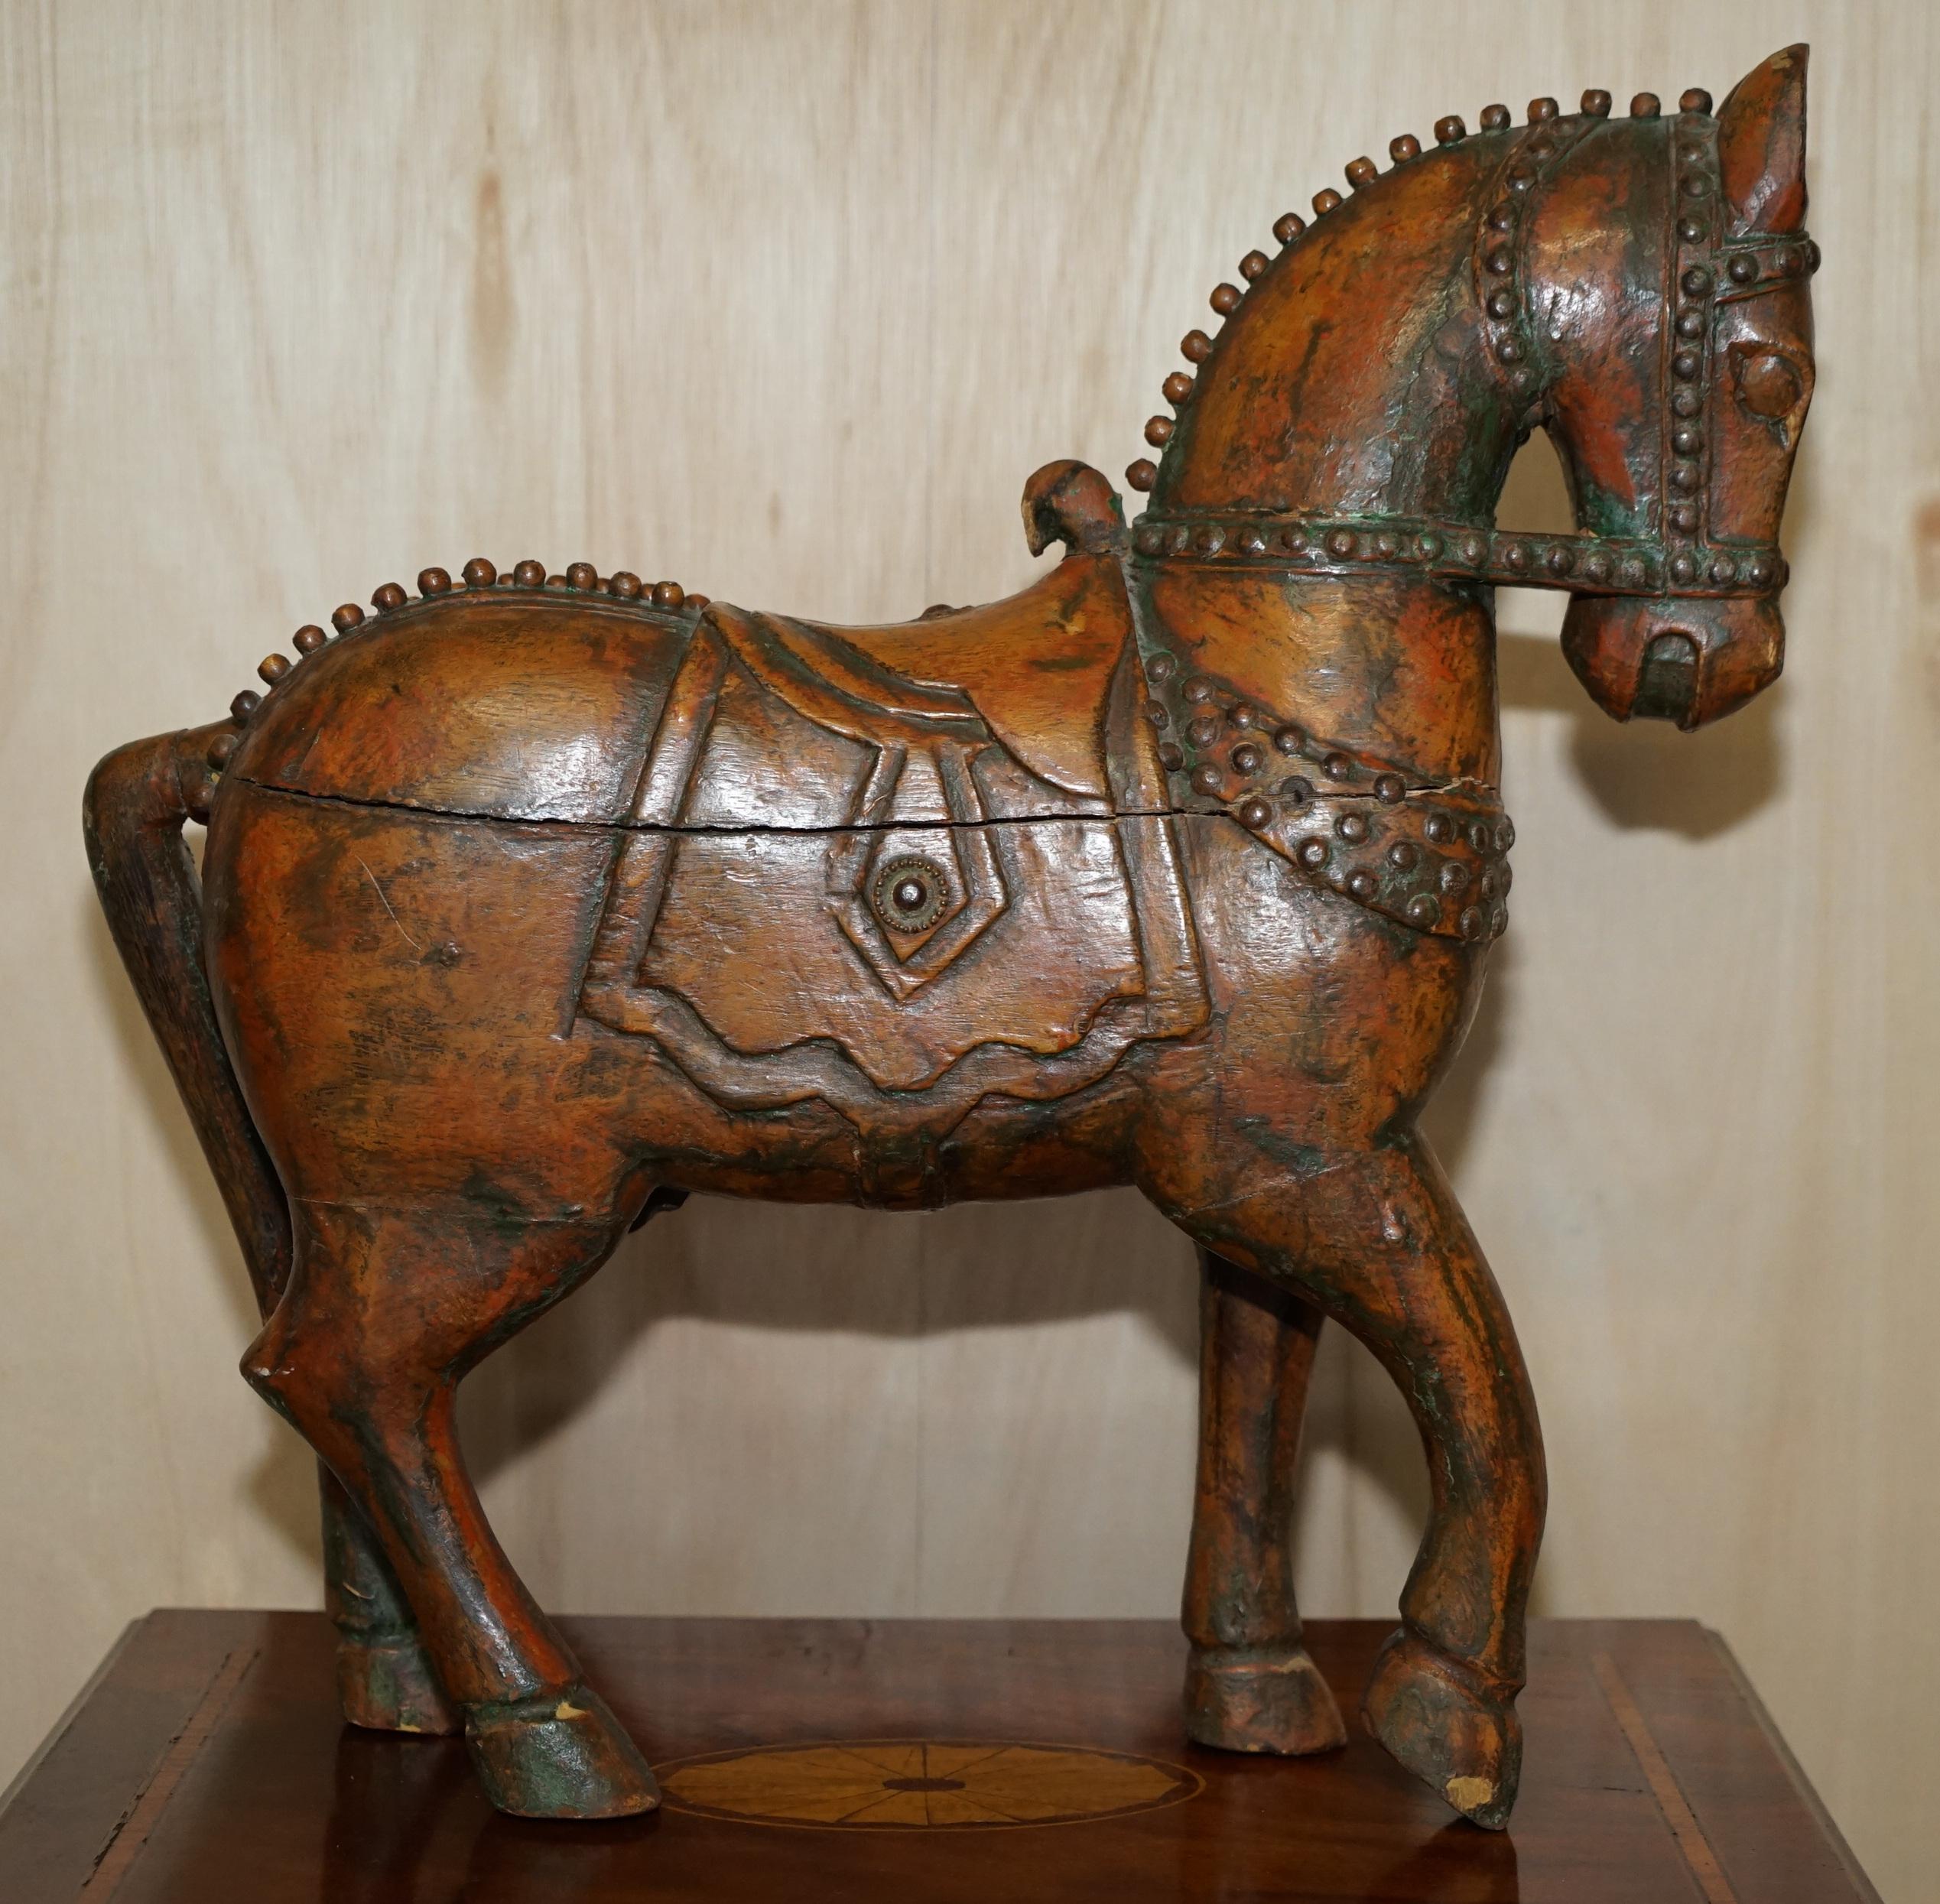 Hand-Carved Decorative Antique Indian Hand Carved & Painted Wooden Statue of a Lovely Horse